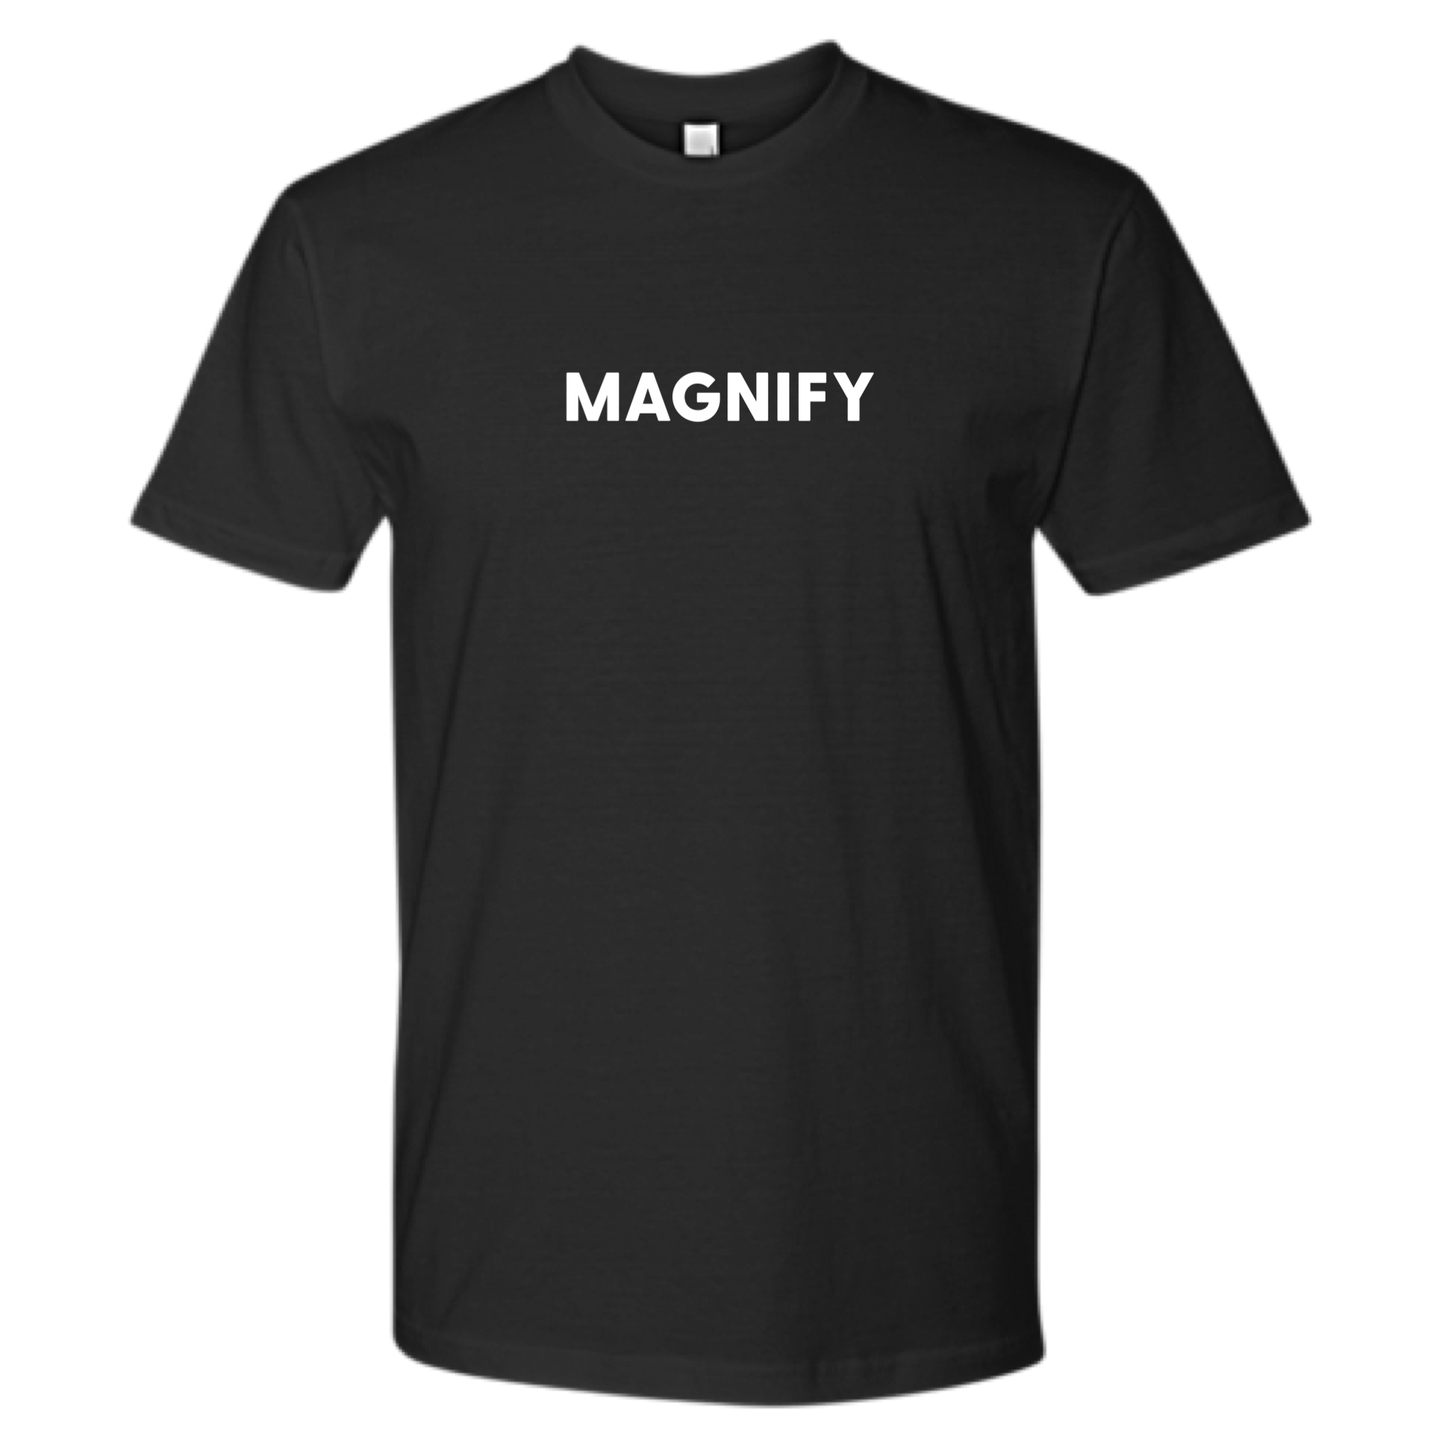 MAGNIFY Tee